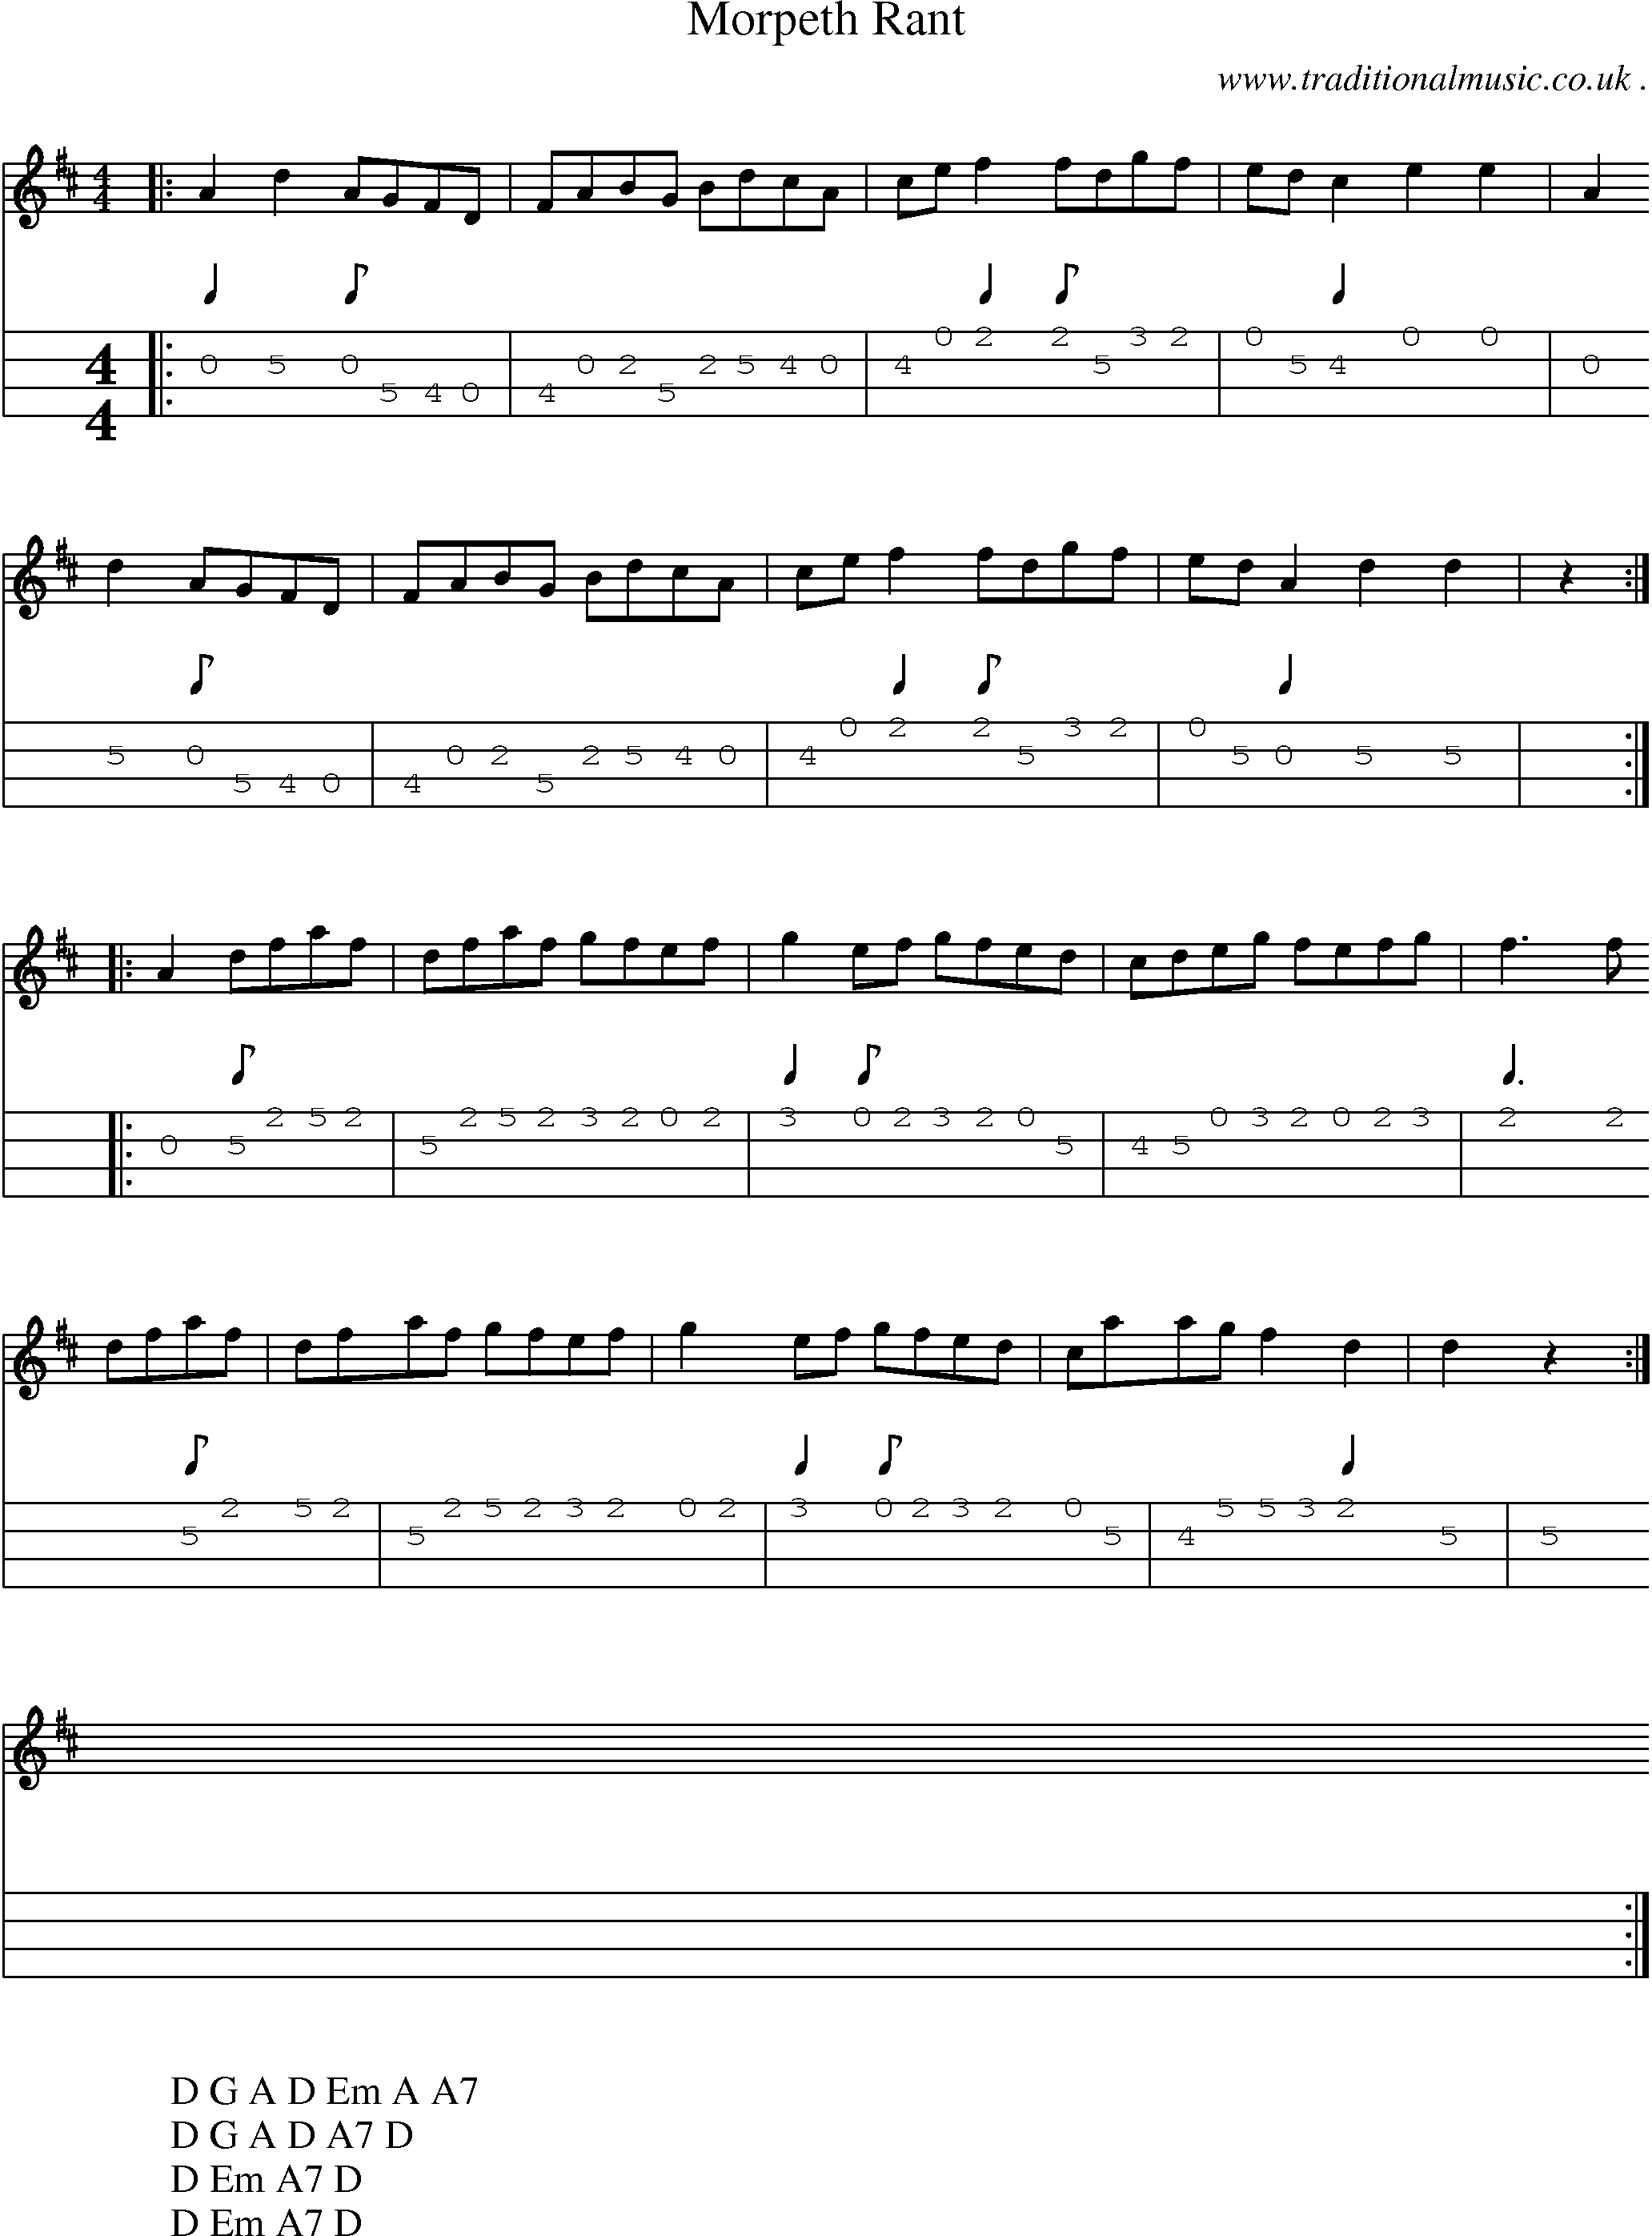 Sheet-music  score, Chords and Mandolin Tabs for Morpeth Rant